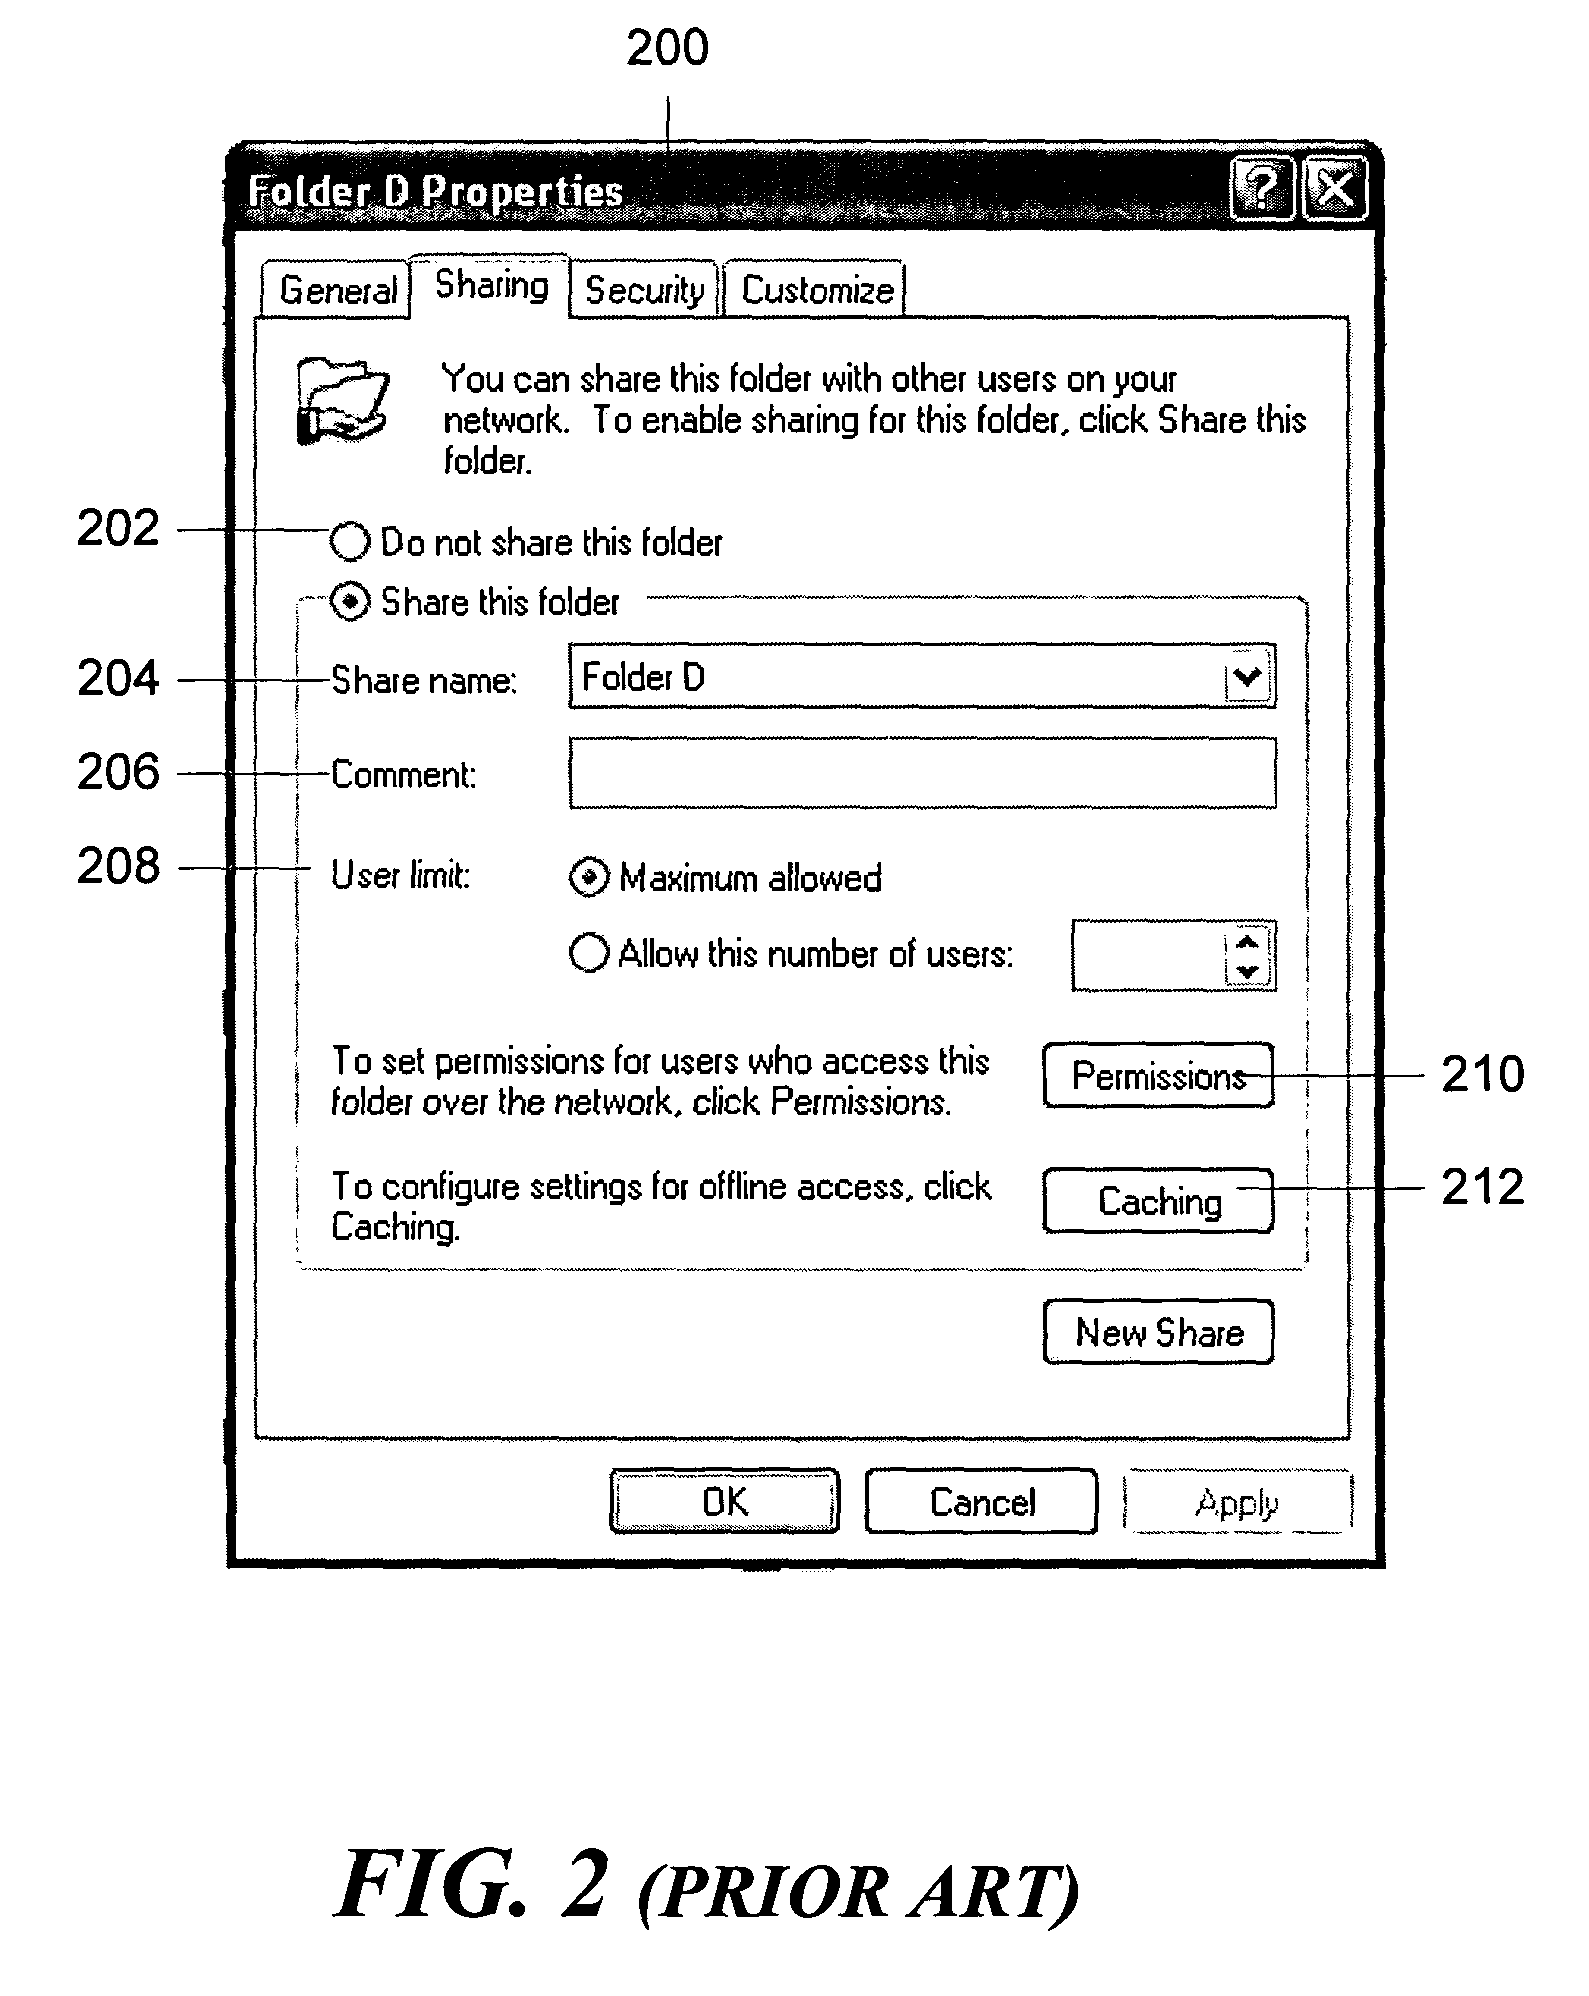 Method and apparatus for providing attributes of a collaboration system in an operating system folder-based file system